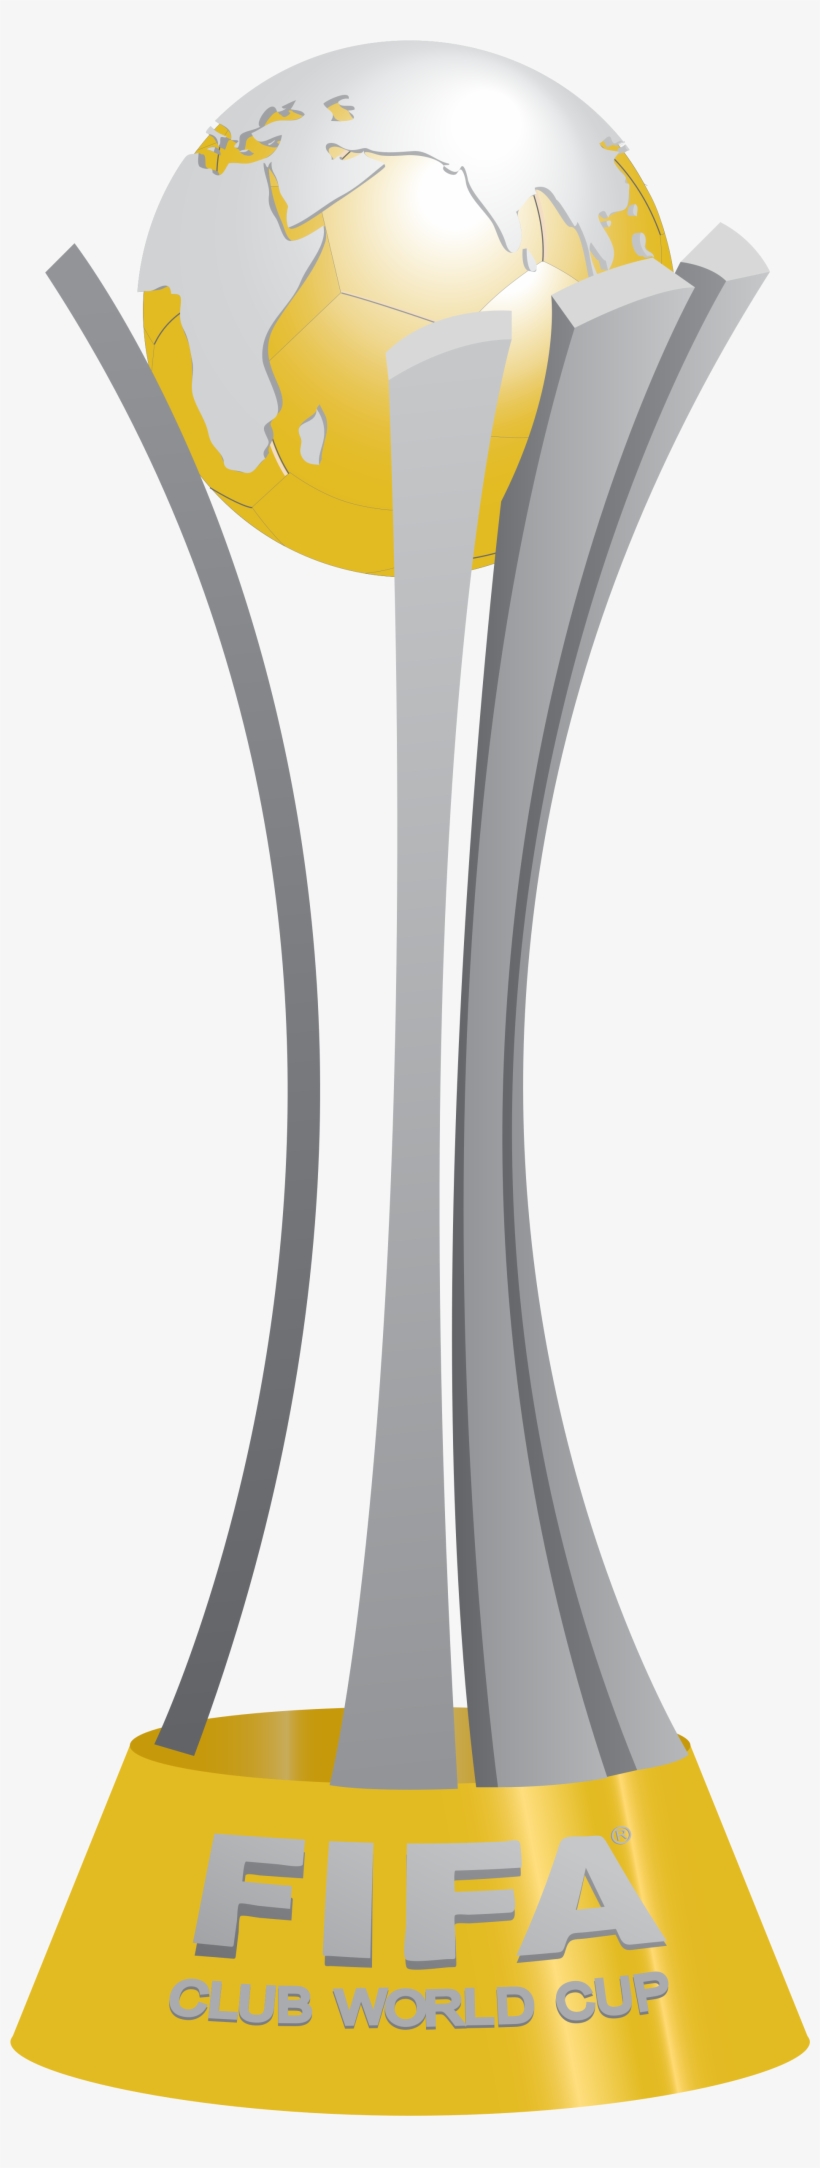 Open - Club World Cup Png, transparent png #5884528